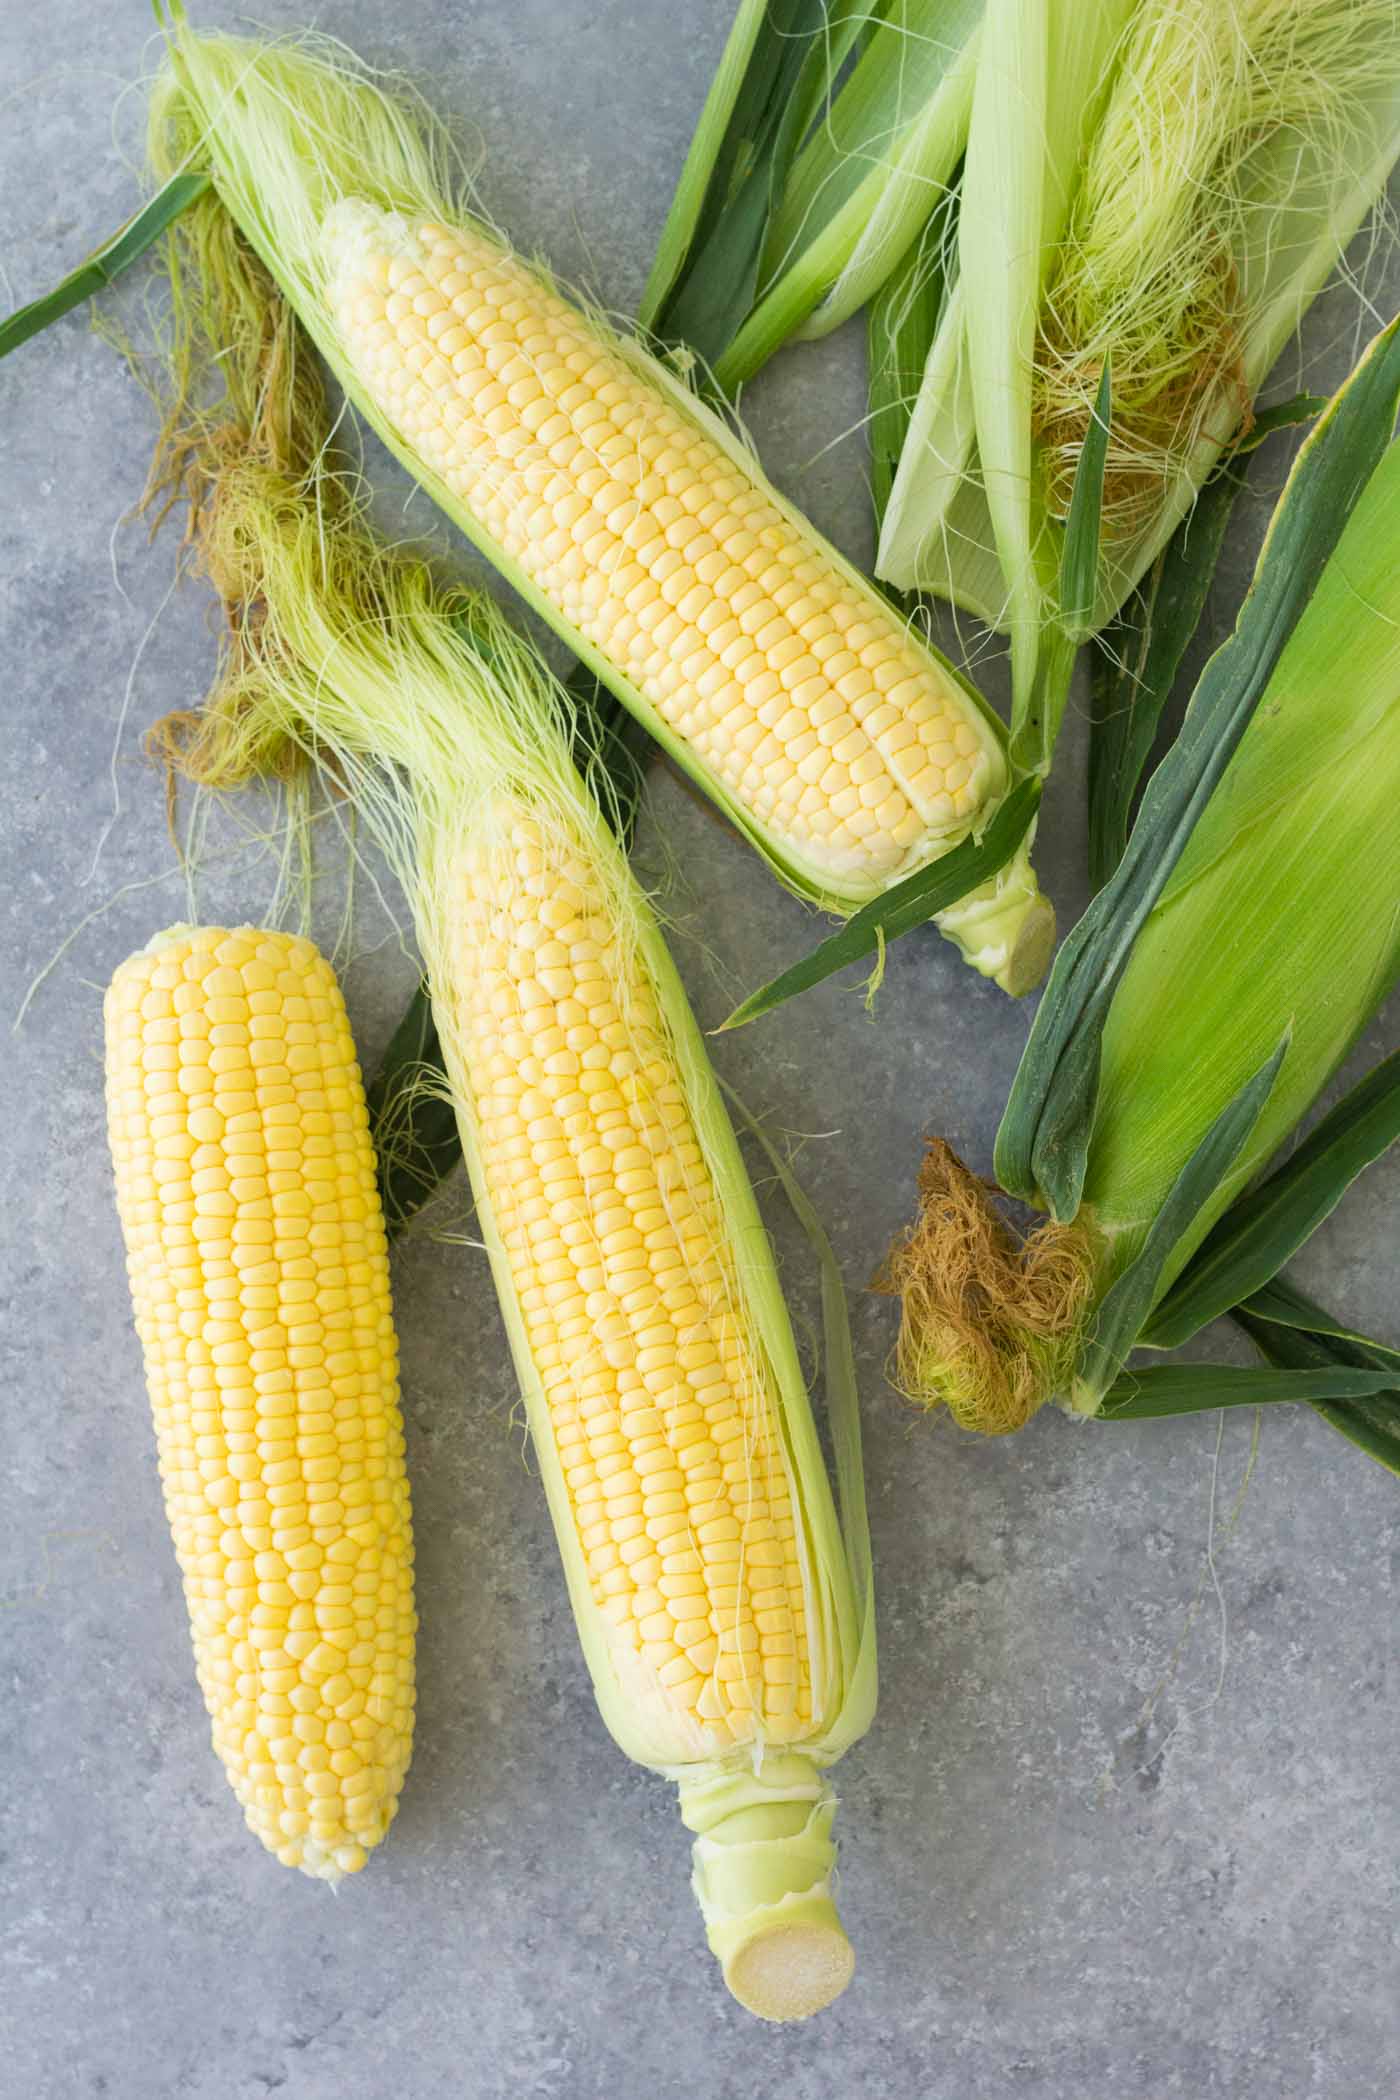 Three cobs of partially shucked corn on the cob.